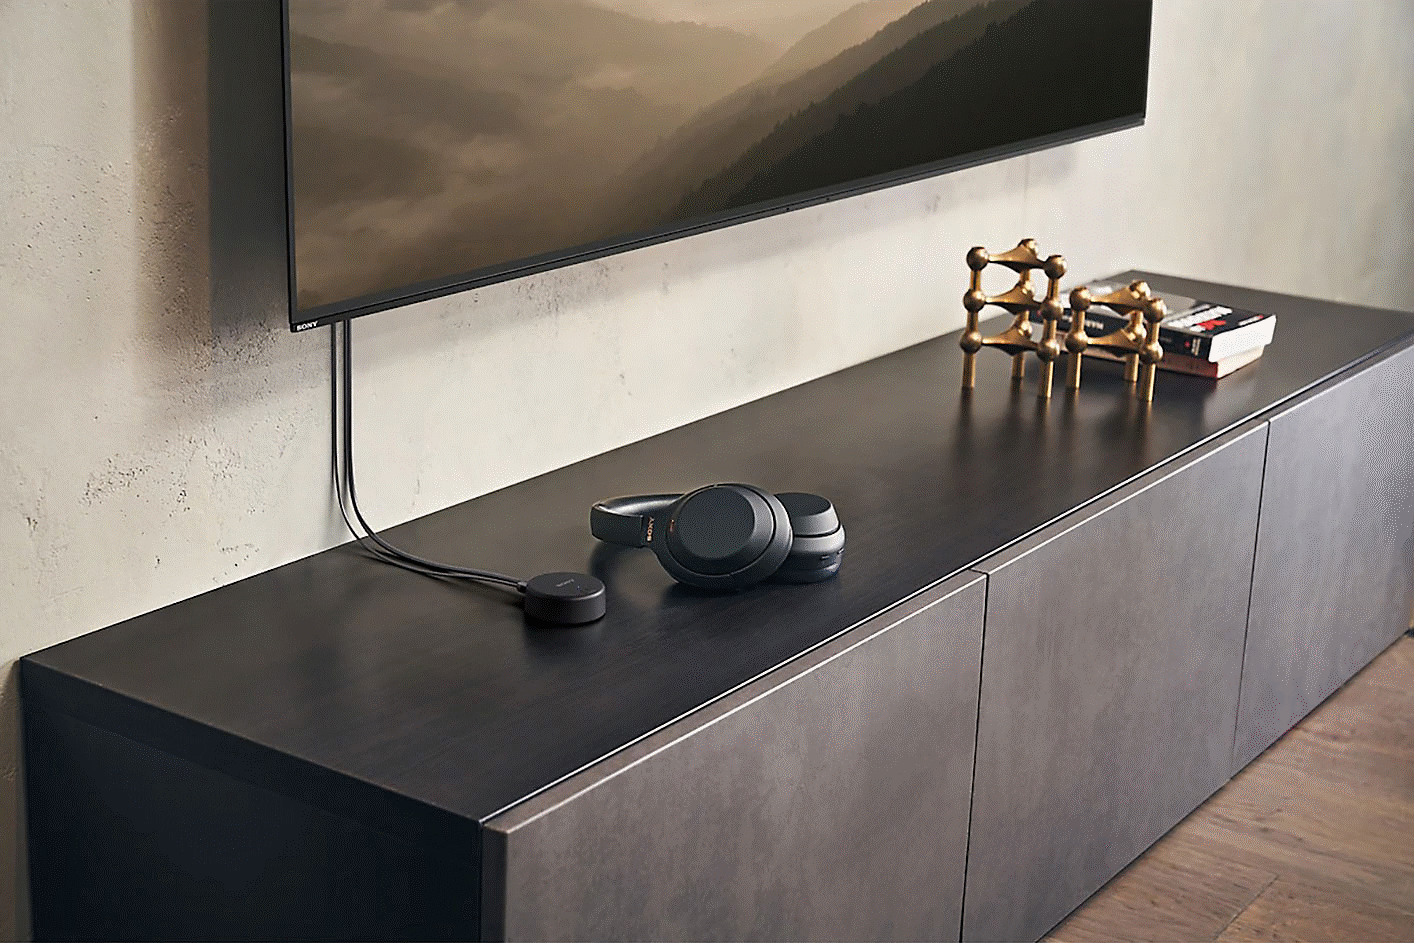 Image of a pair of headphones sitting on a TV unit next to a Sony WLA-NS7 wireless transmitter